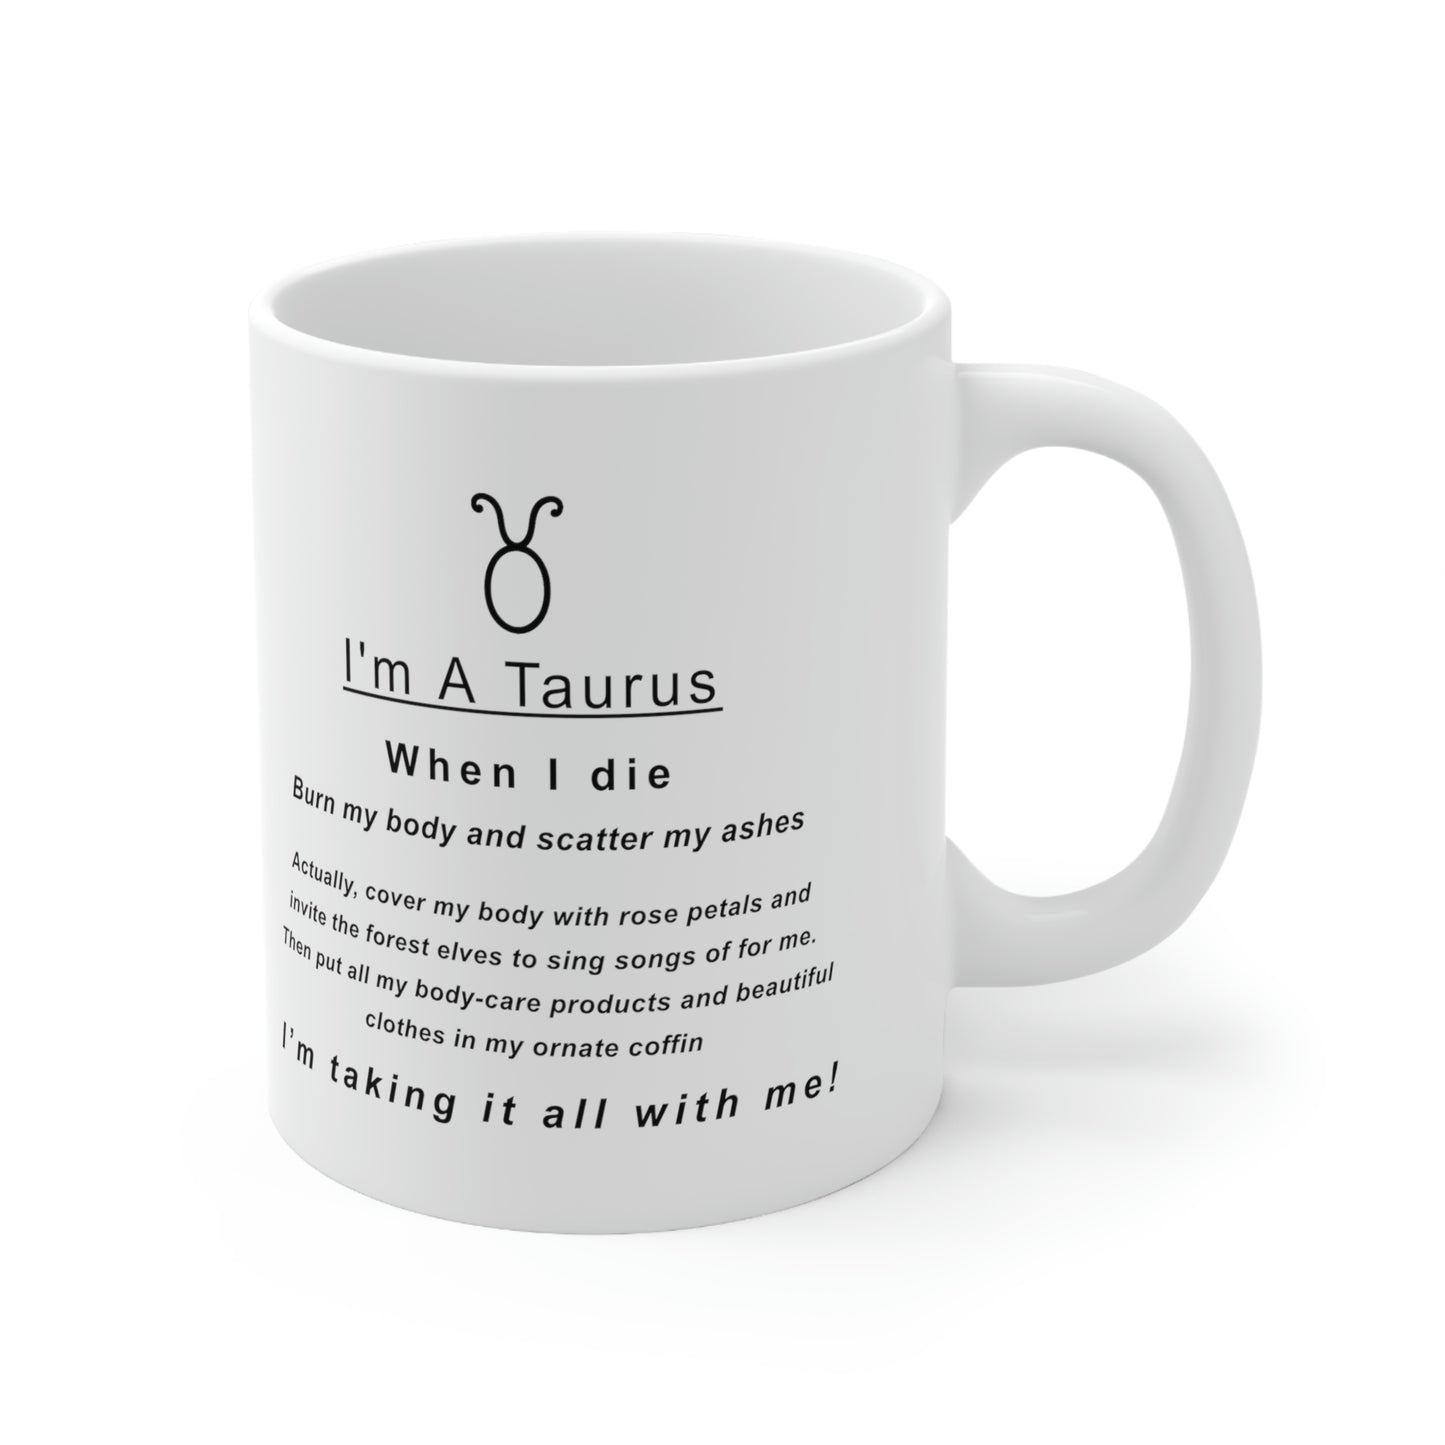 Taurus Mug: "When I Die, I'm Taking It All With Me" - full text in description